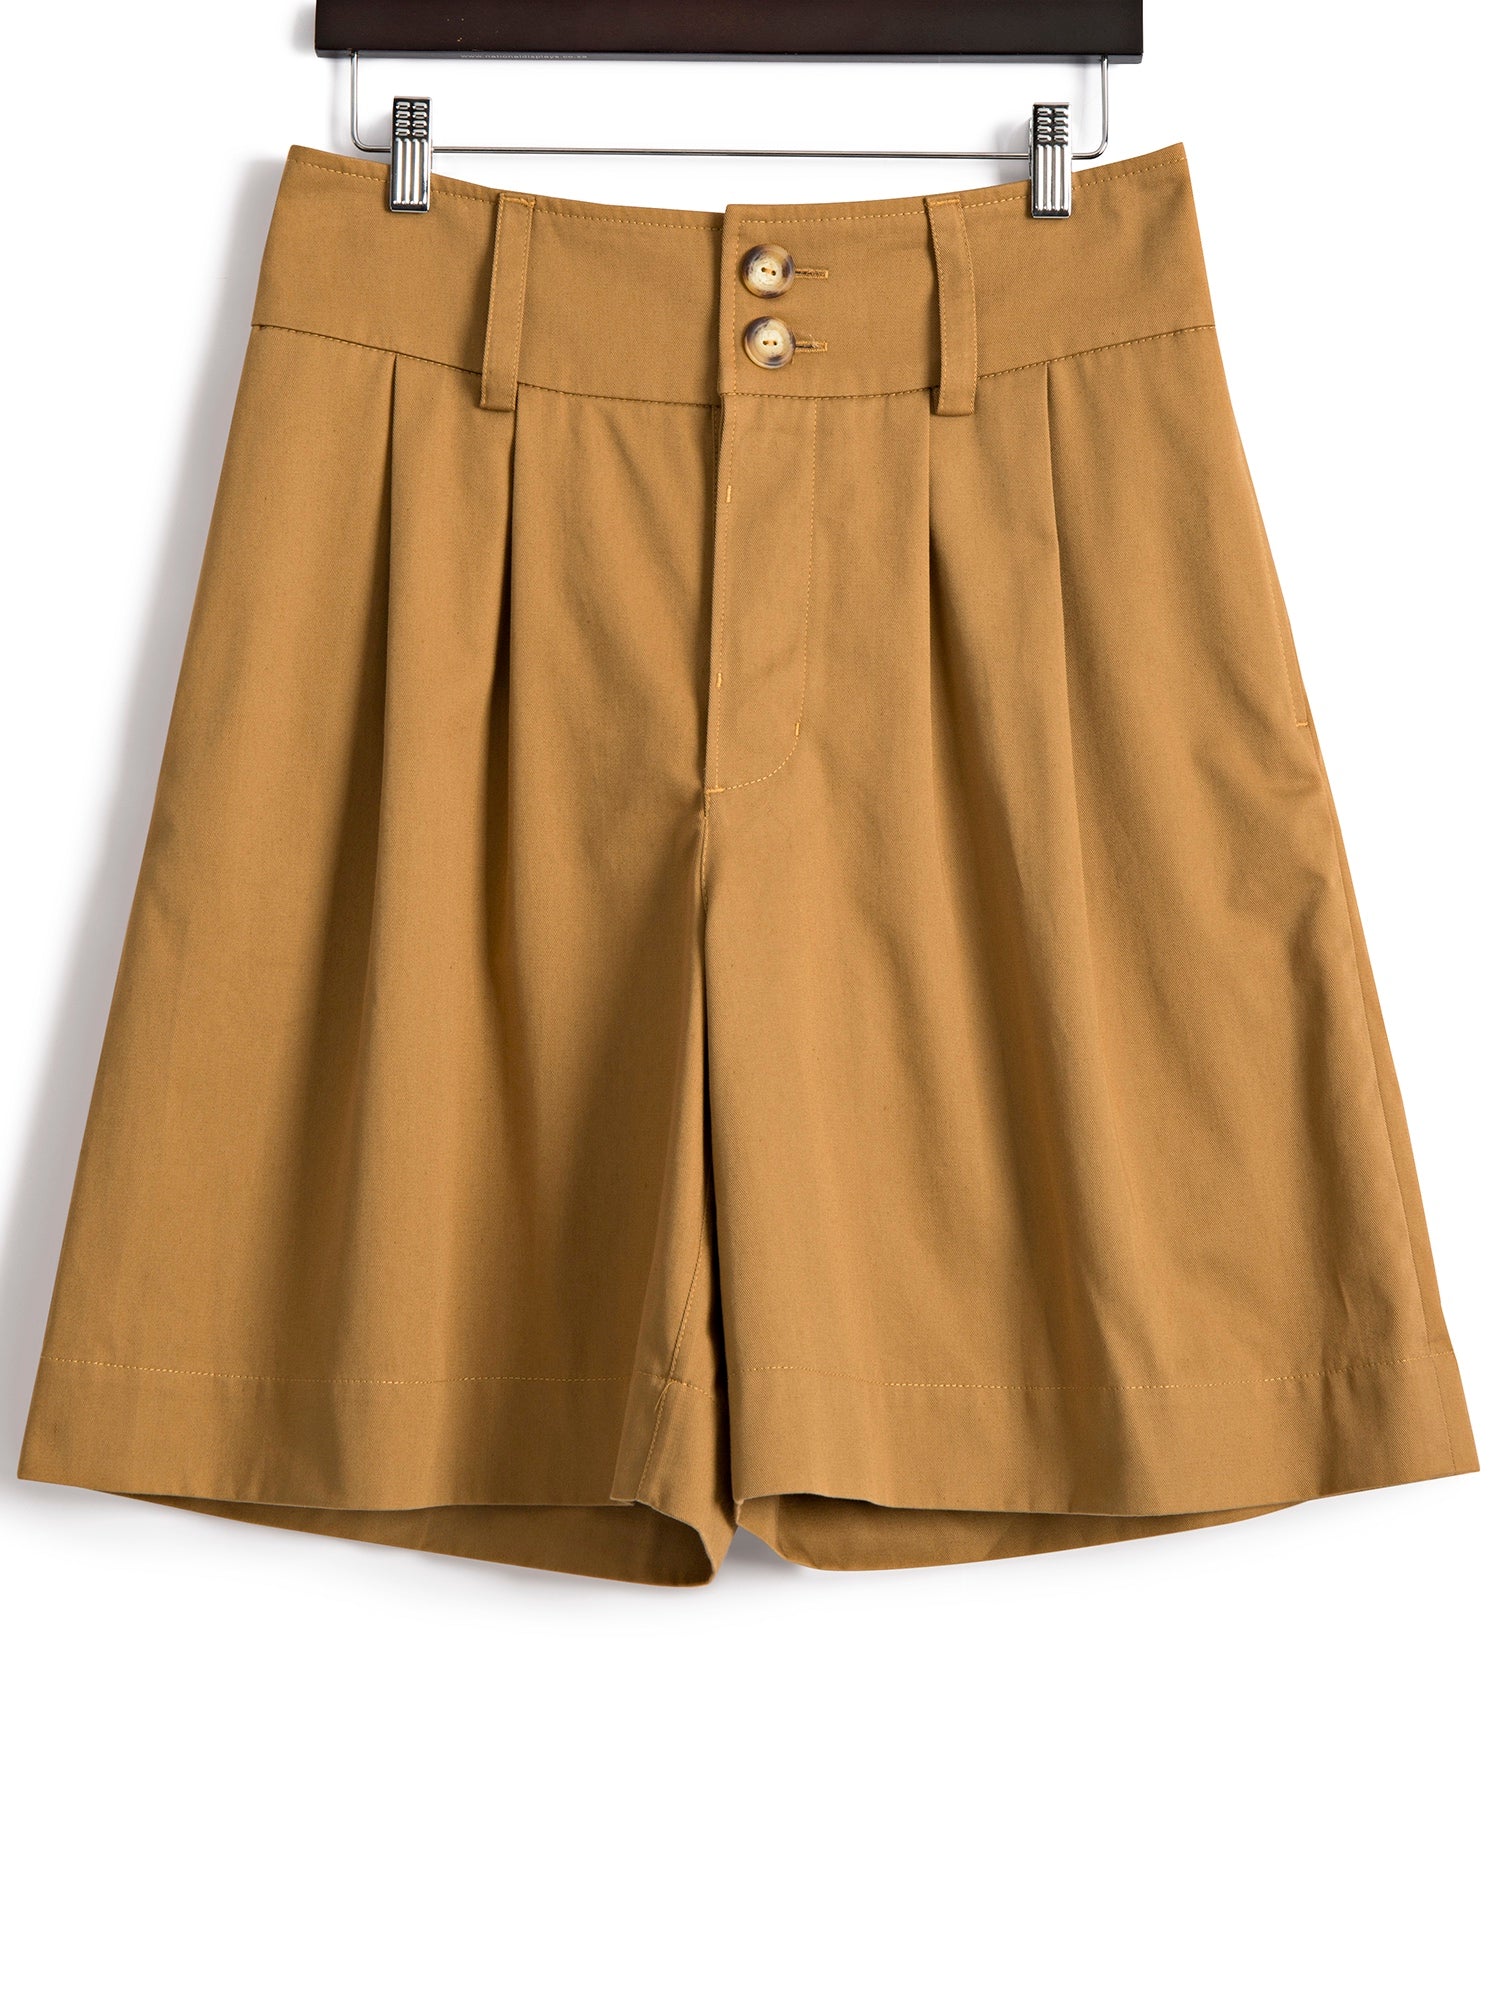 Pleat Front Shorts in Camel, Shorts, Hickman & Bousfied - Hickman & Bousfield, Safari and Travel Clothing